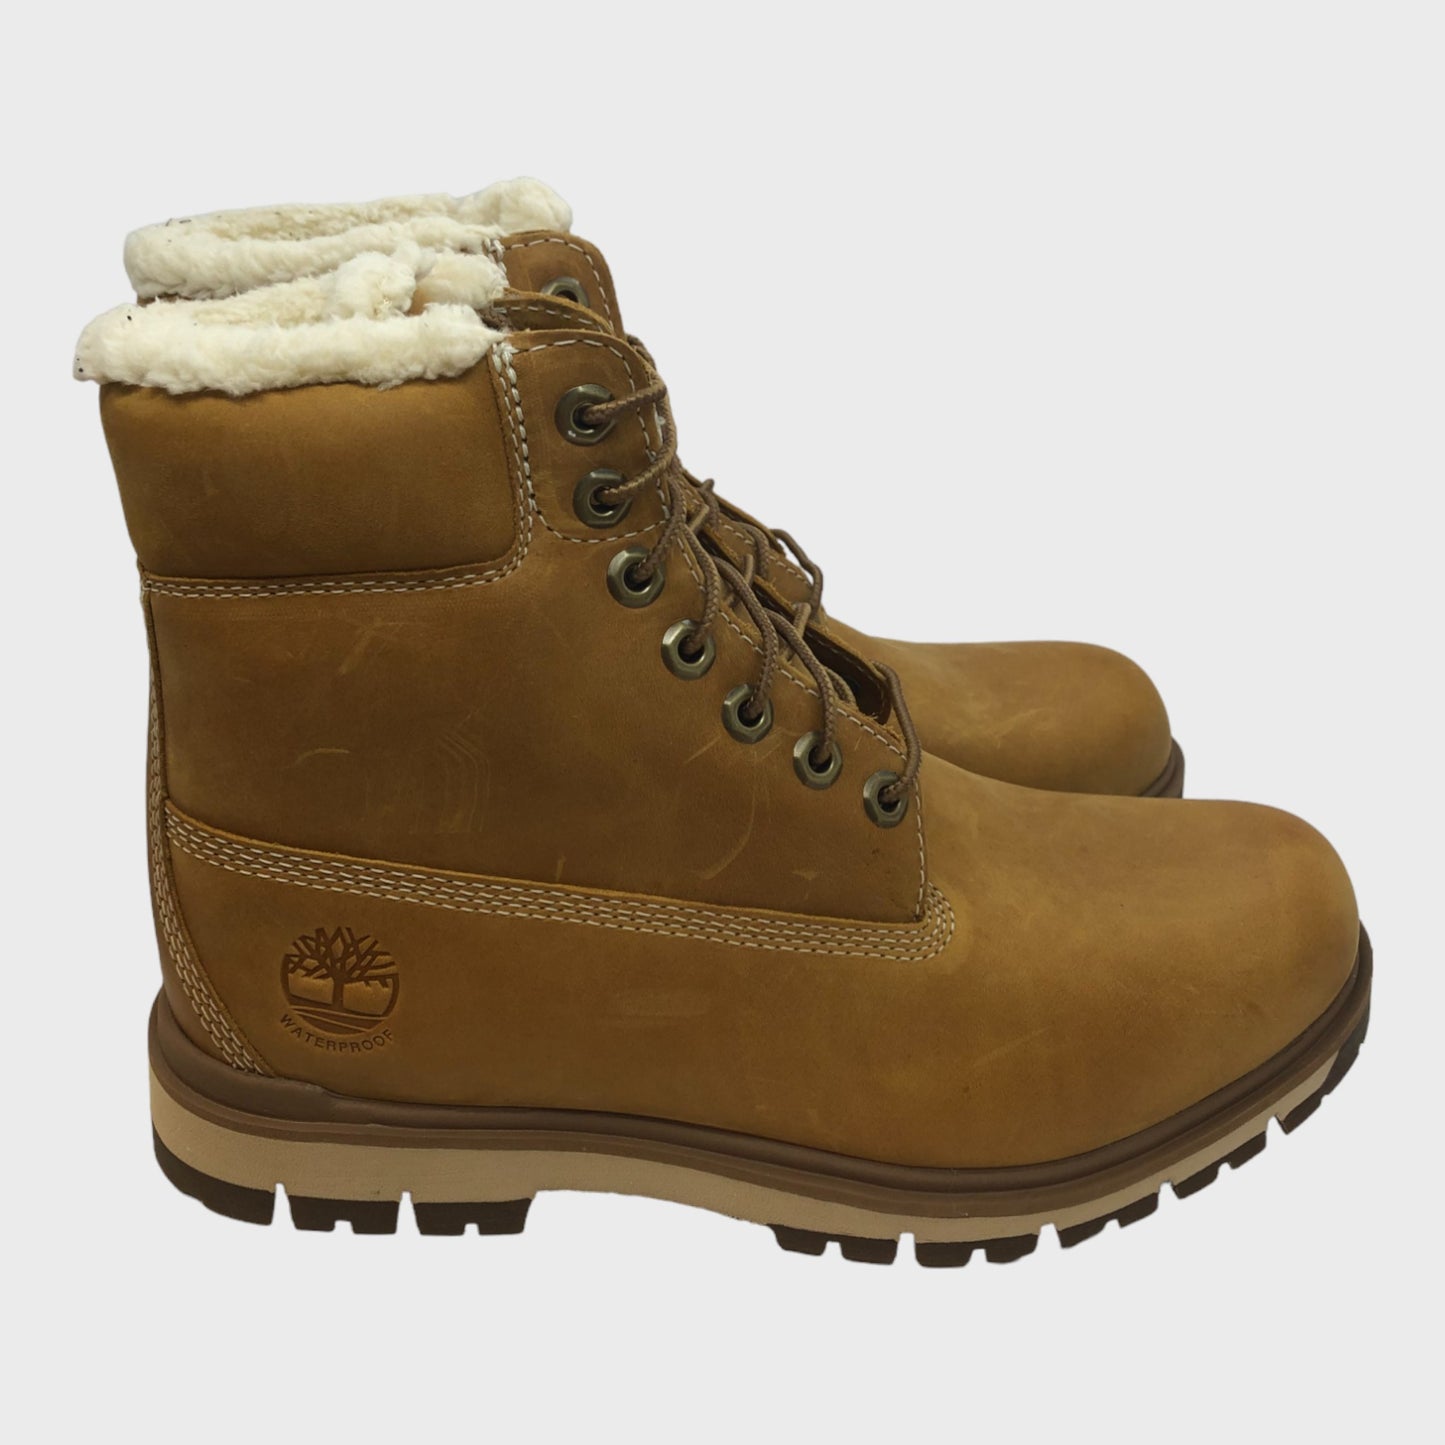 Men's Timberland 'Radford' Warm Lined Boots